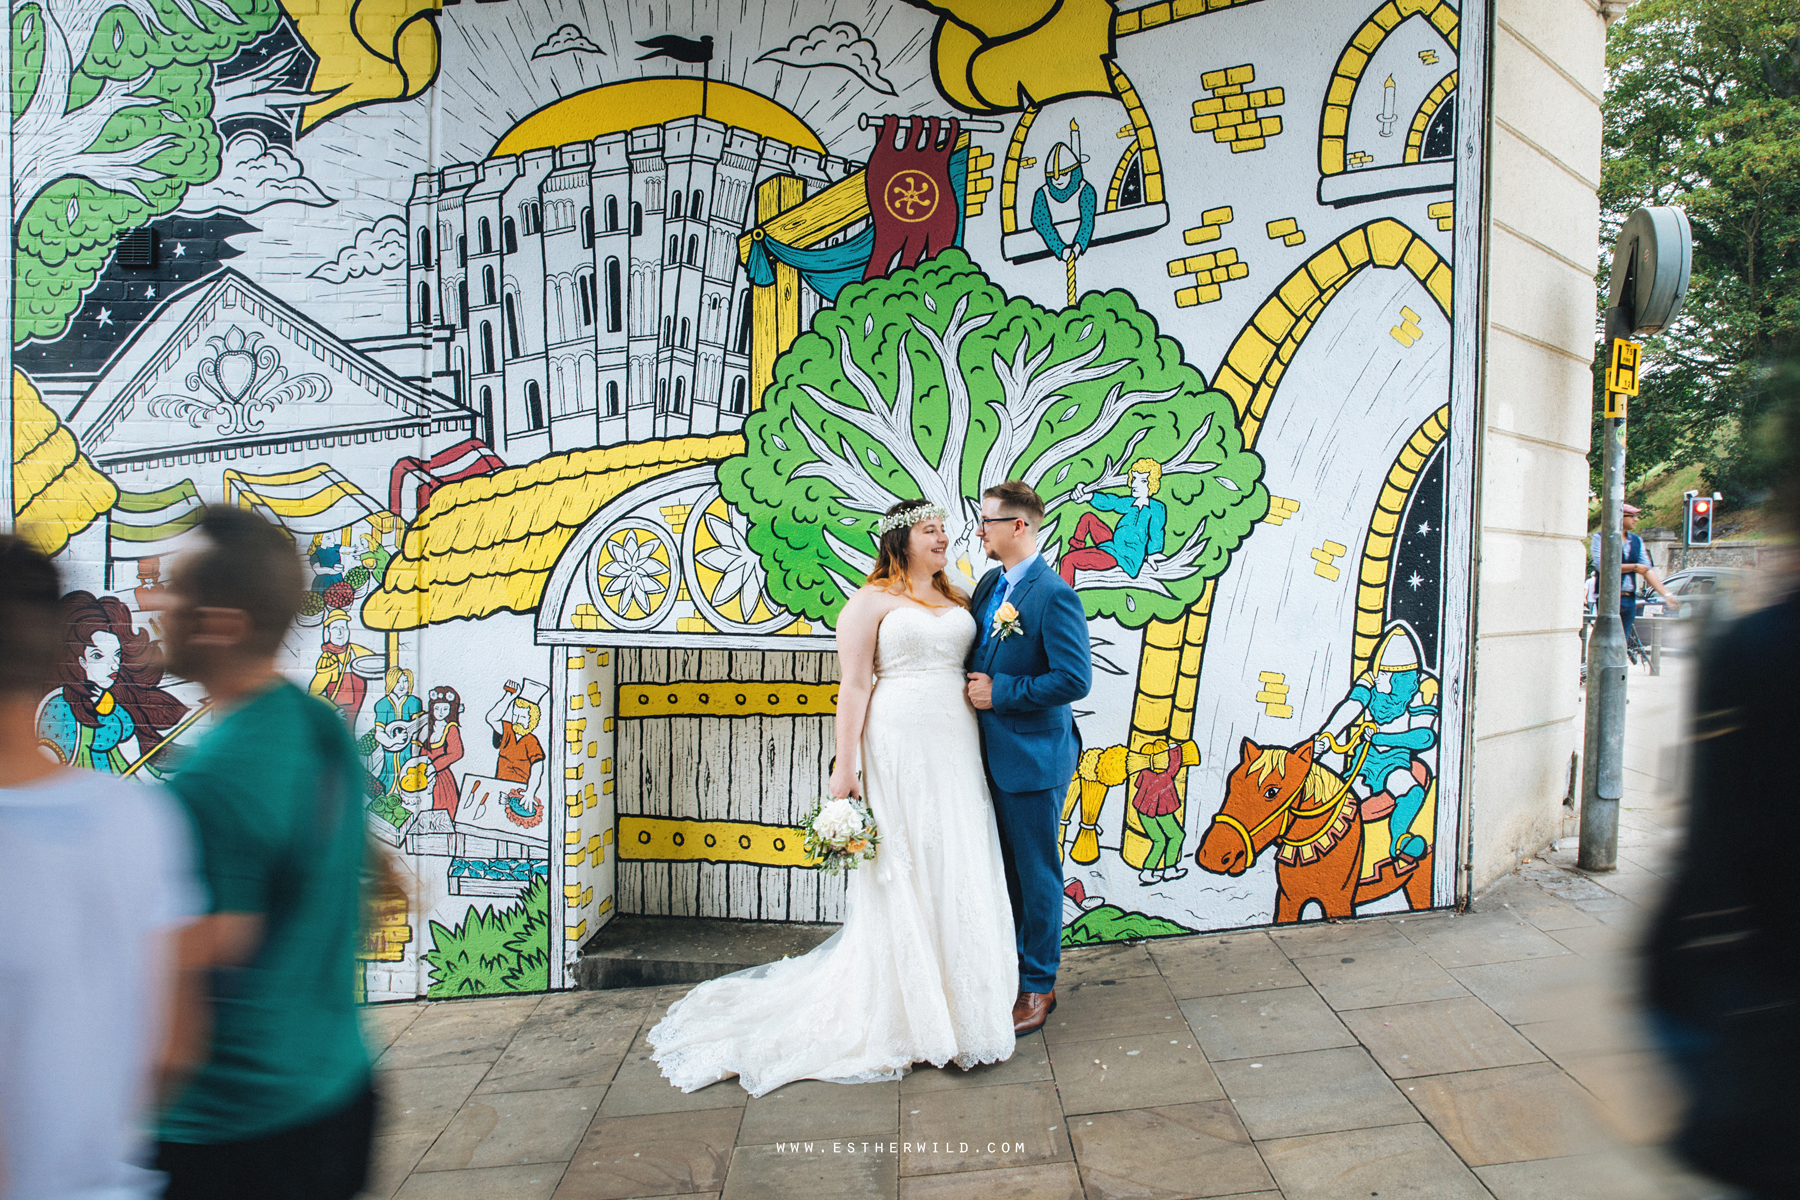 Norwich_Castle_Arcade_Grosvenor_Chip_Birdcage_Cathedral_Cloisters_Refectory_Wedding_Photography_Esther_Wild_Photographer_Norfolk_Kings_Lynn_3R8A1261.jpg